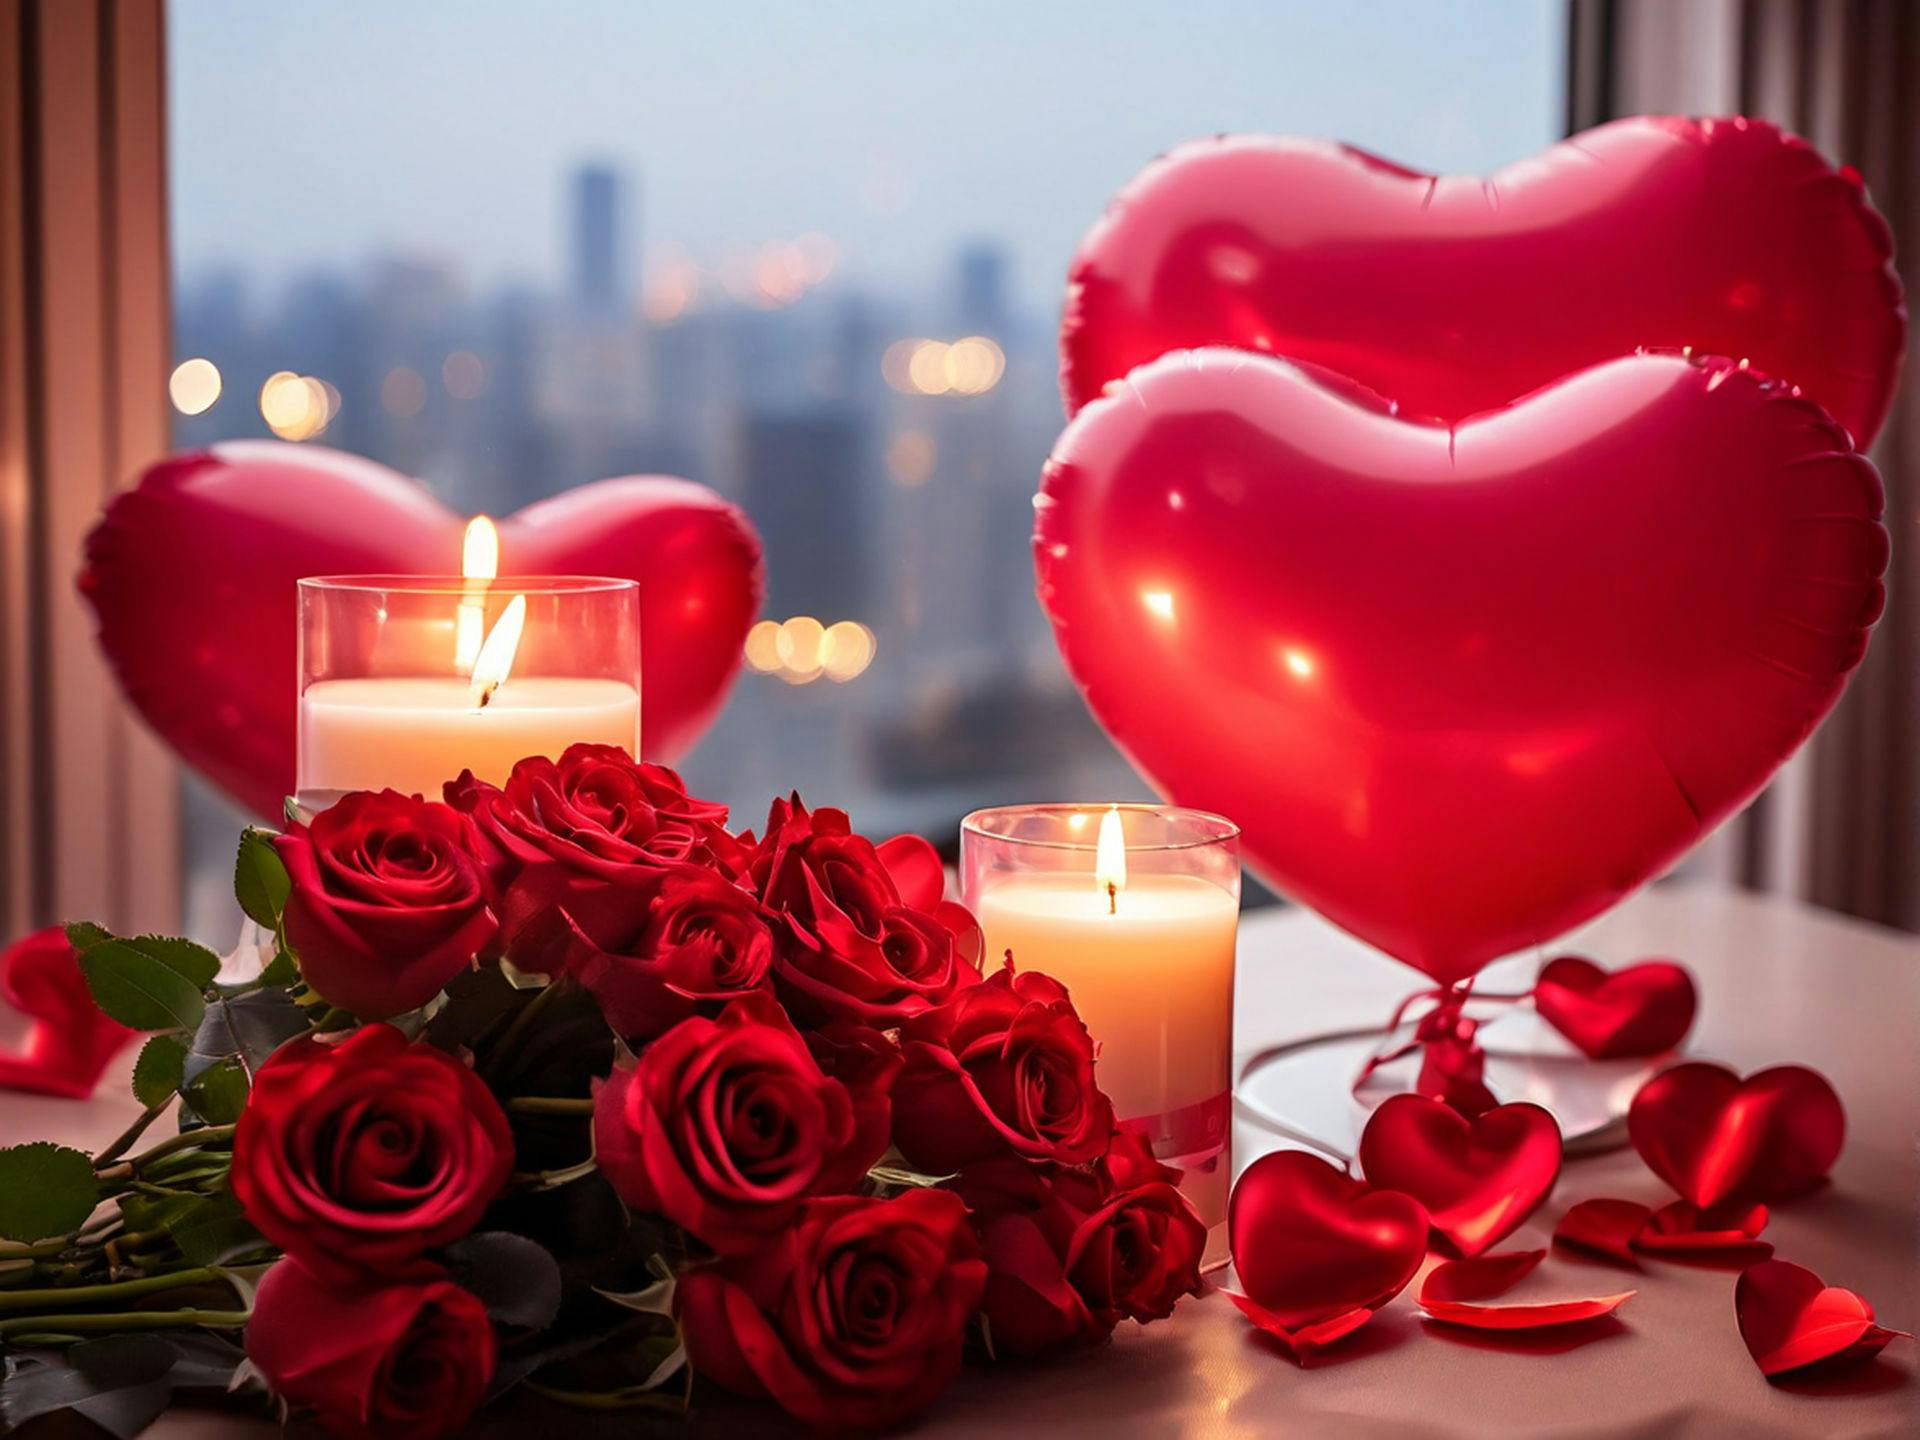 Valentine's Day Romantic Setup with Roses and Heart-Shaped Balloons